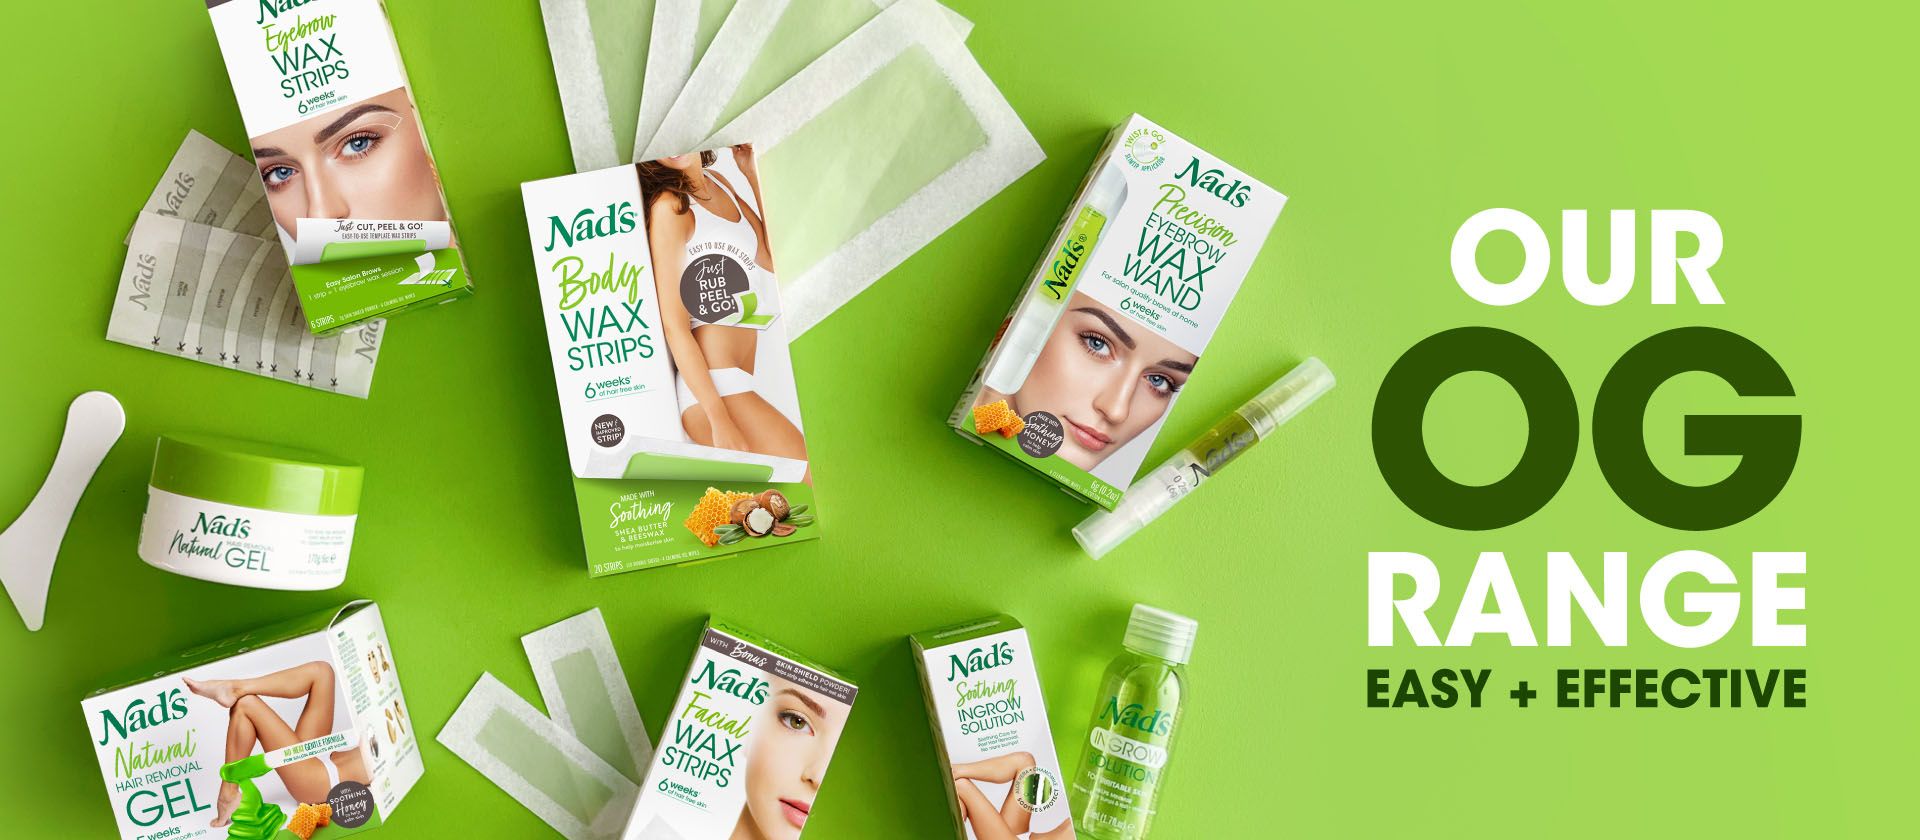 Our OG Range easy and effective | Nad's Hair Removal